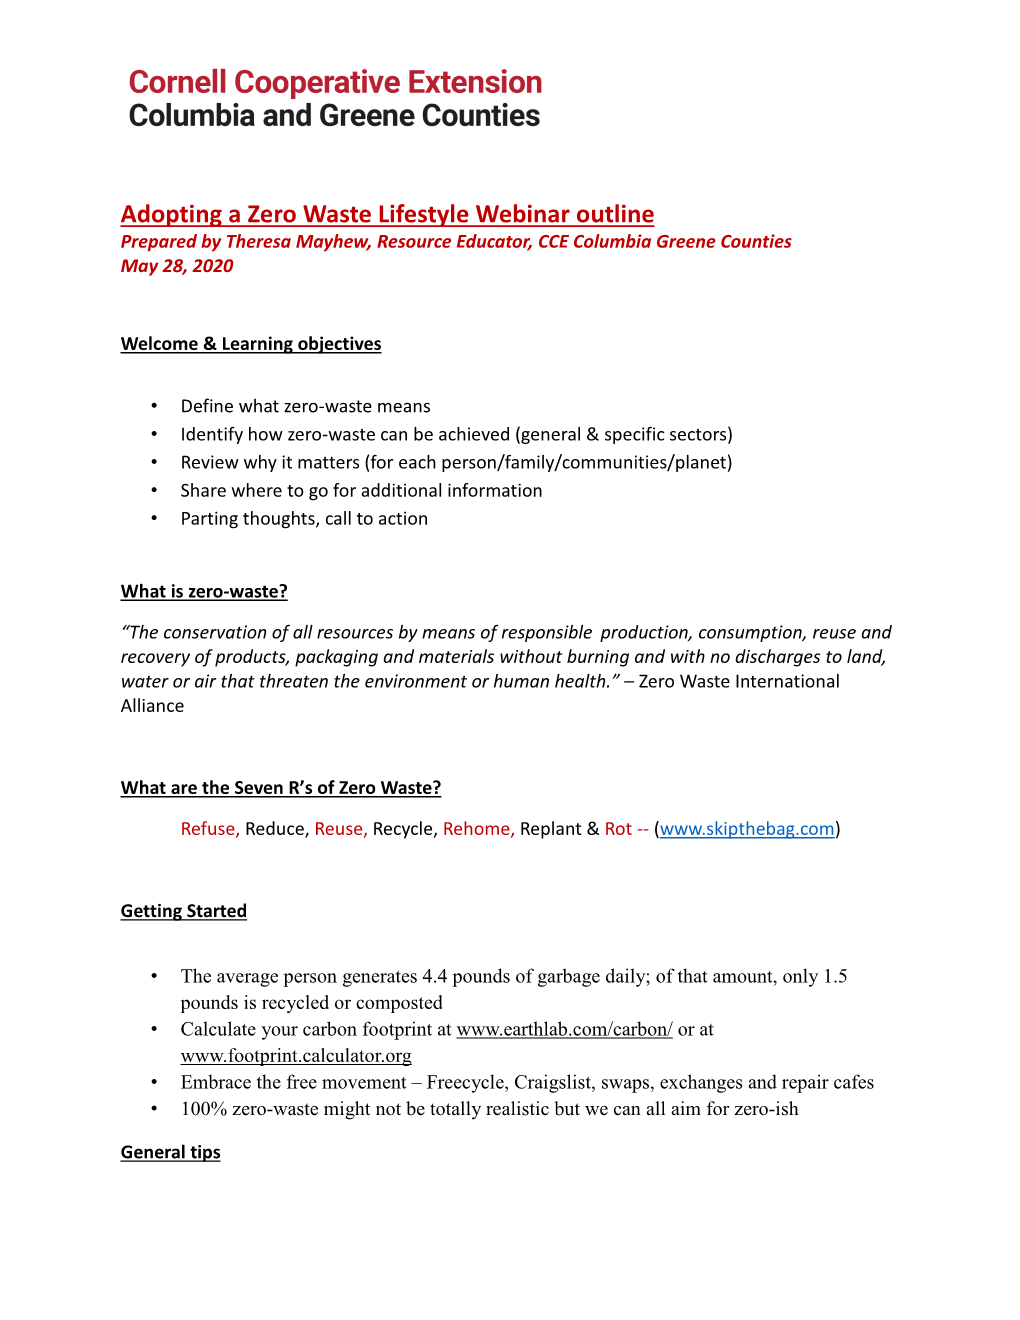 Adopting a Zero Waste Lifestyle Webinar Outline Prepared by Theresa Mayhew, Resource Educator, CCE Columbia Greene Counties May 28, 2020